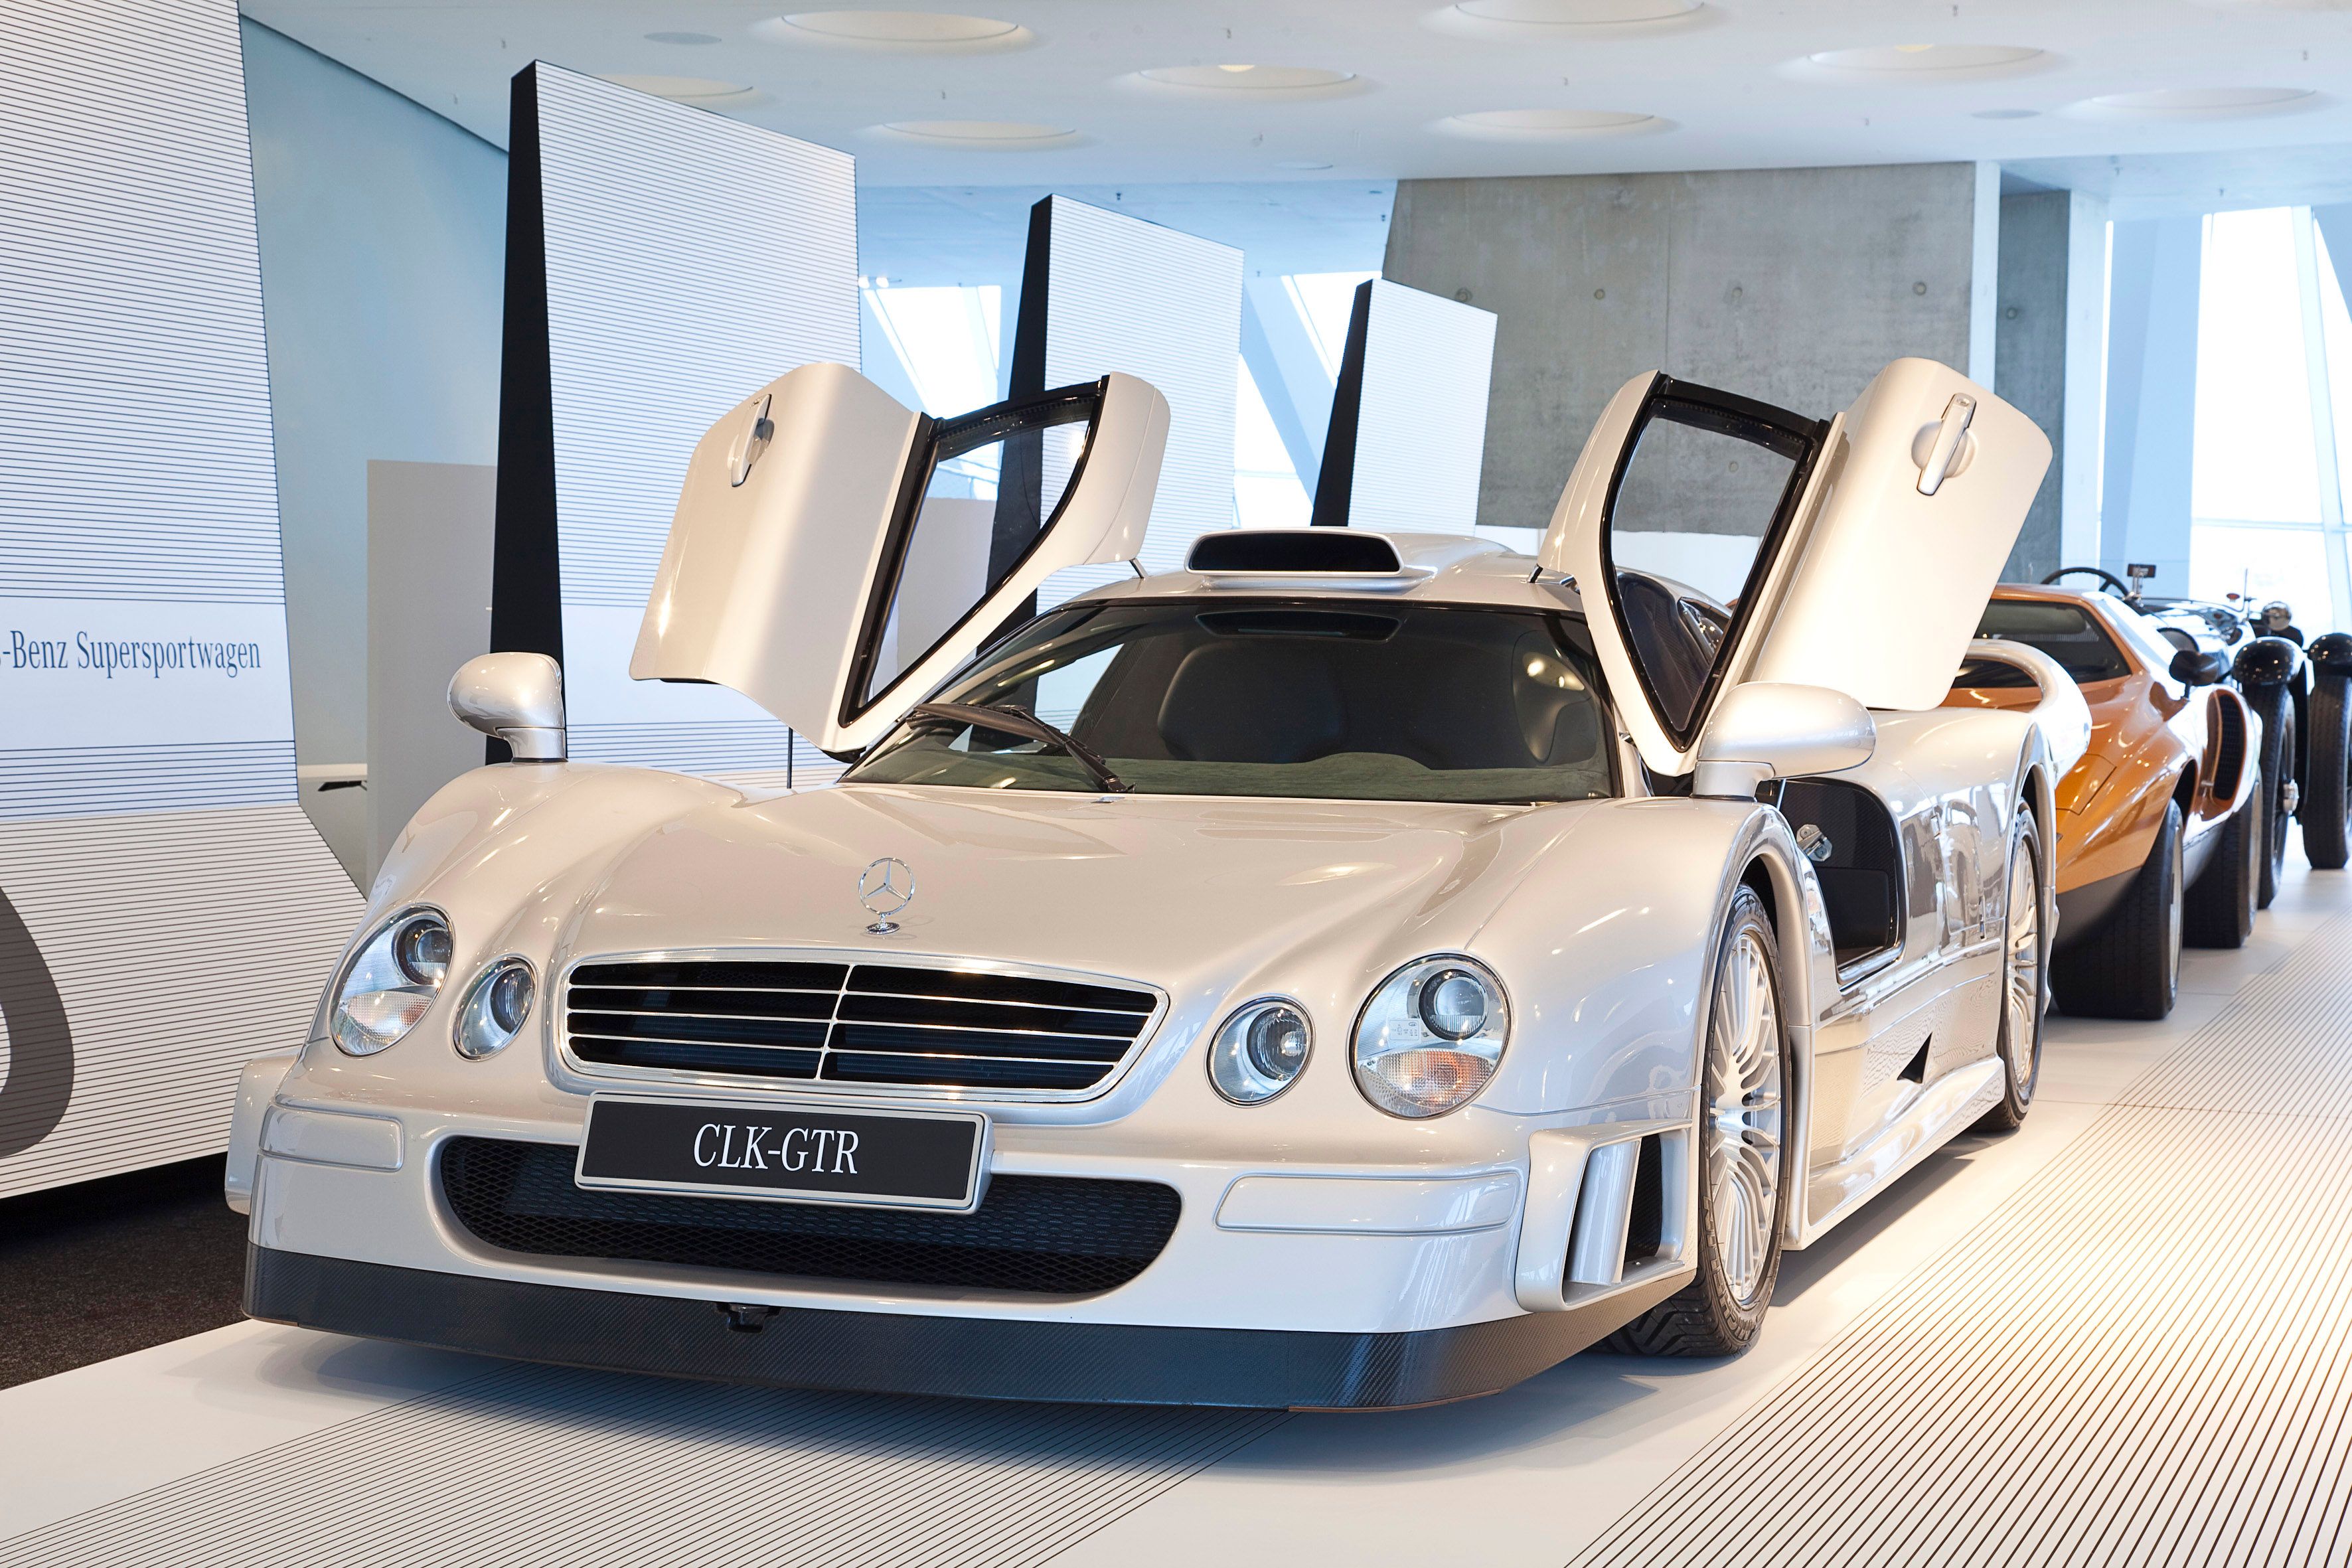 The Most Expensive Production Car In The World In 1998: The Mercedes-Benz  CLK GTR